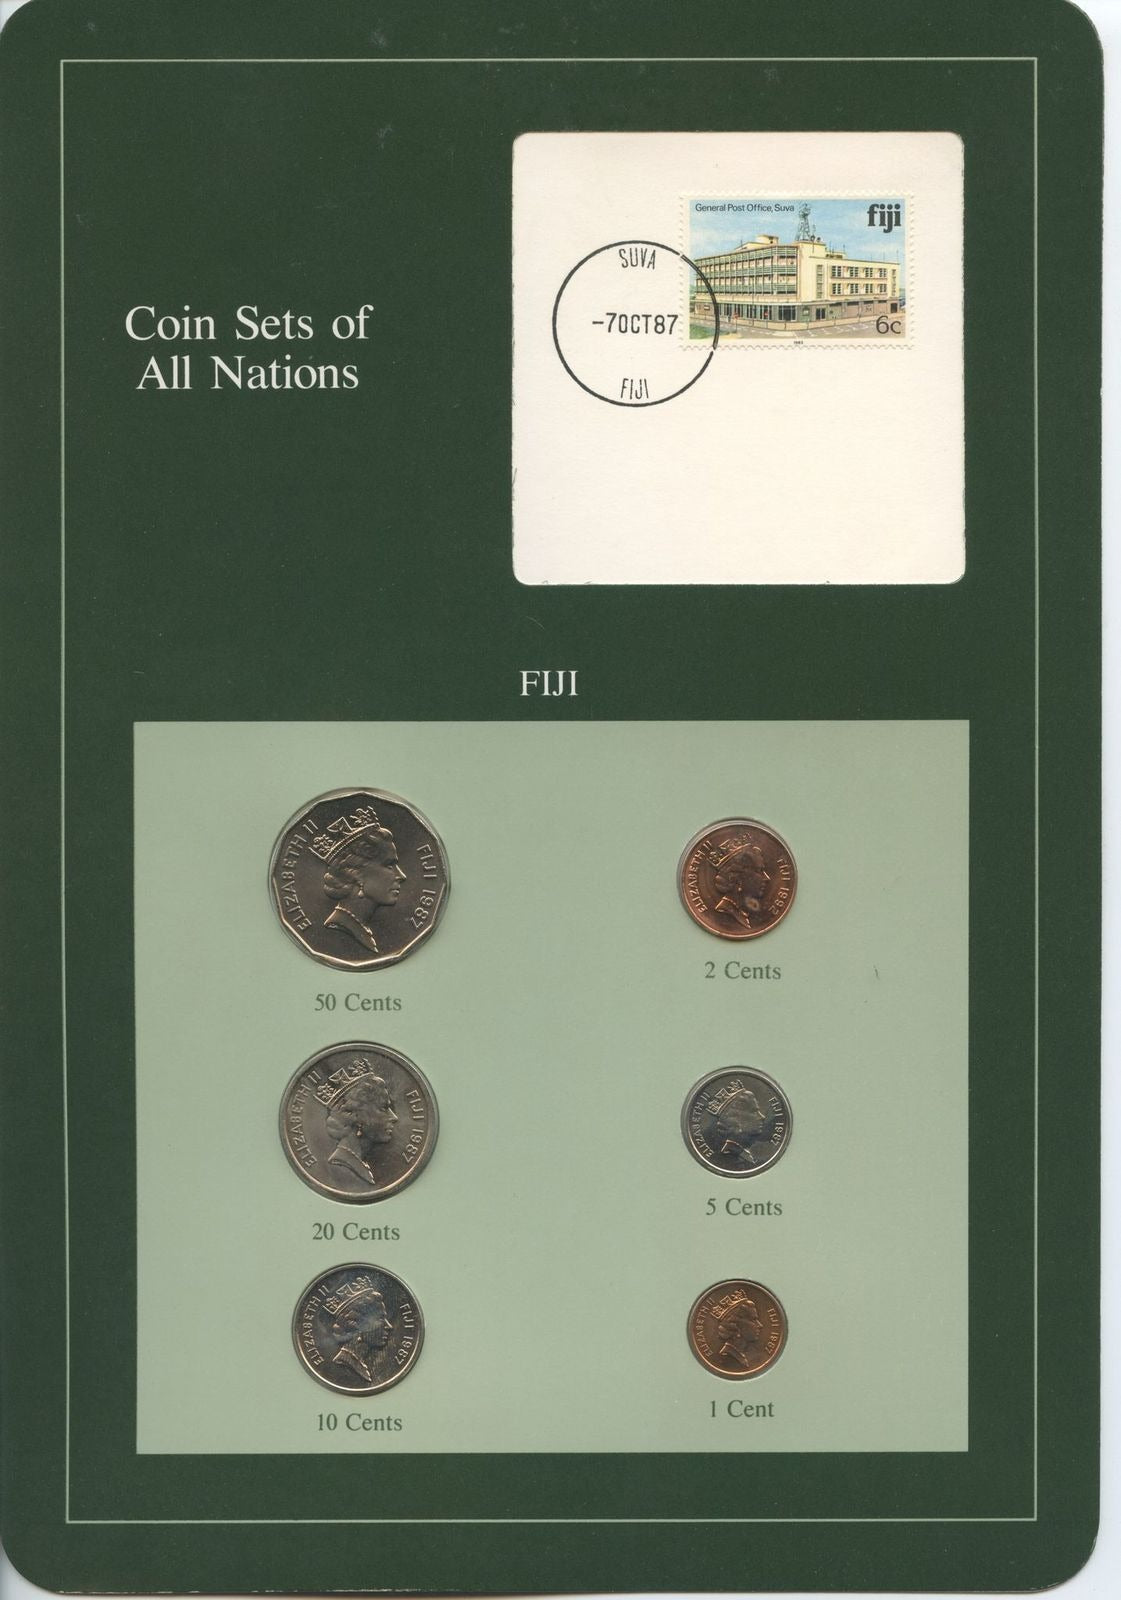 Coin Sets of All Nations - Oceania – Franklin Mint